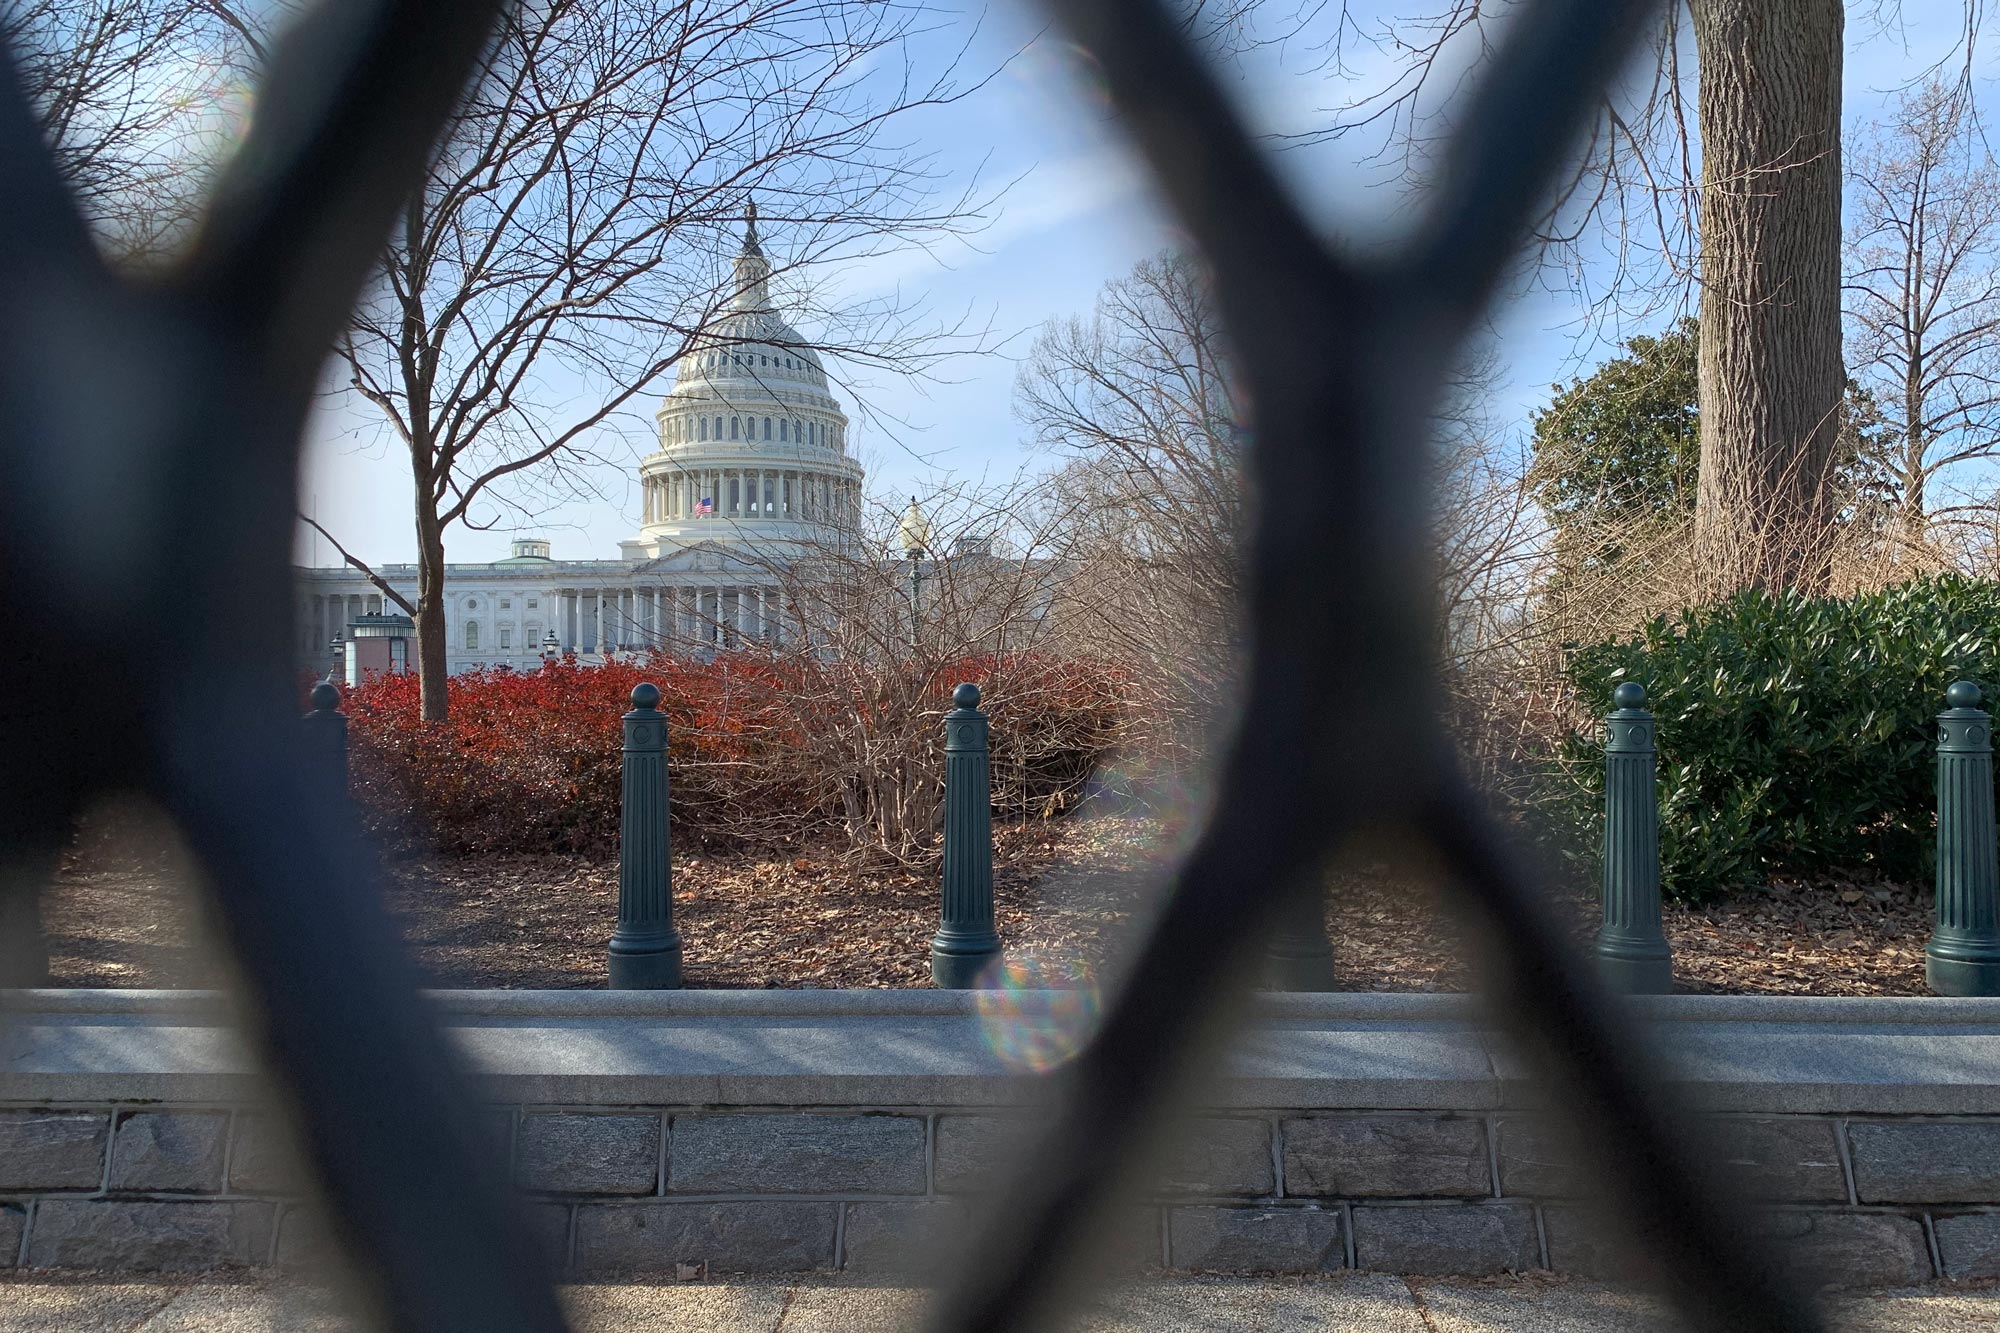 Viewing the Capitol building through a chain linked fence